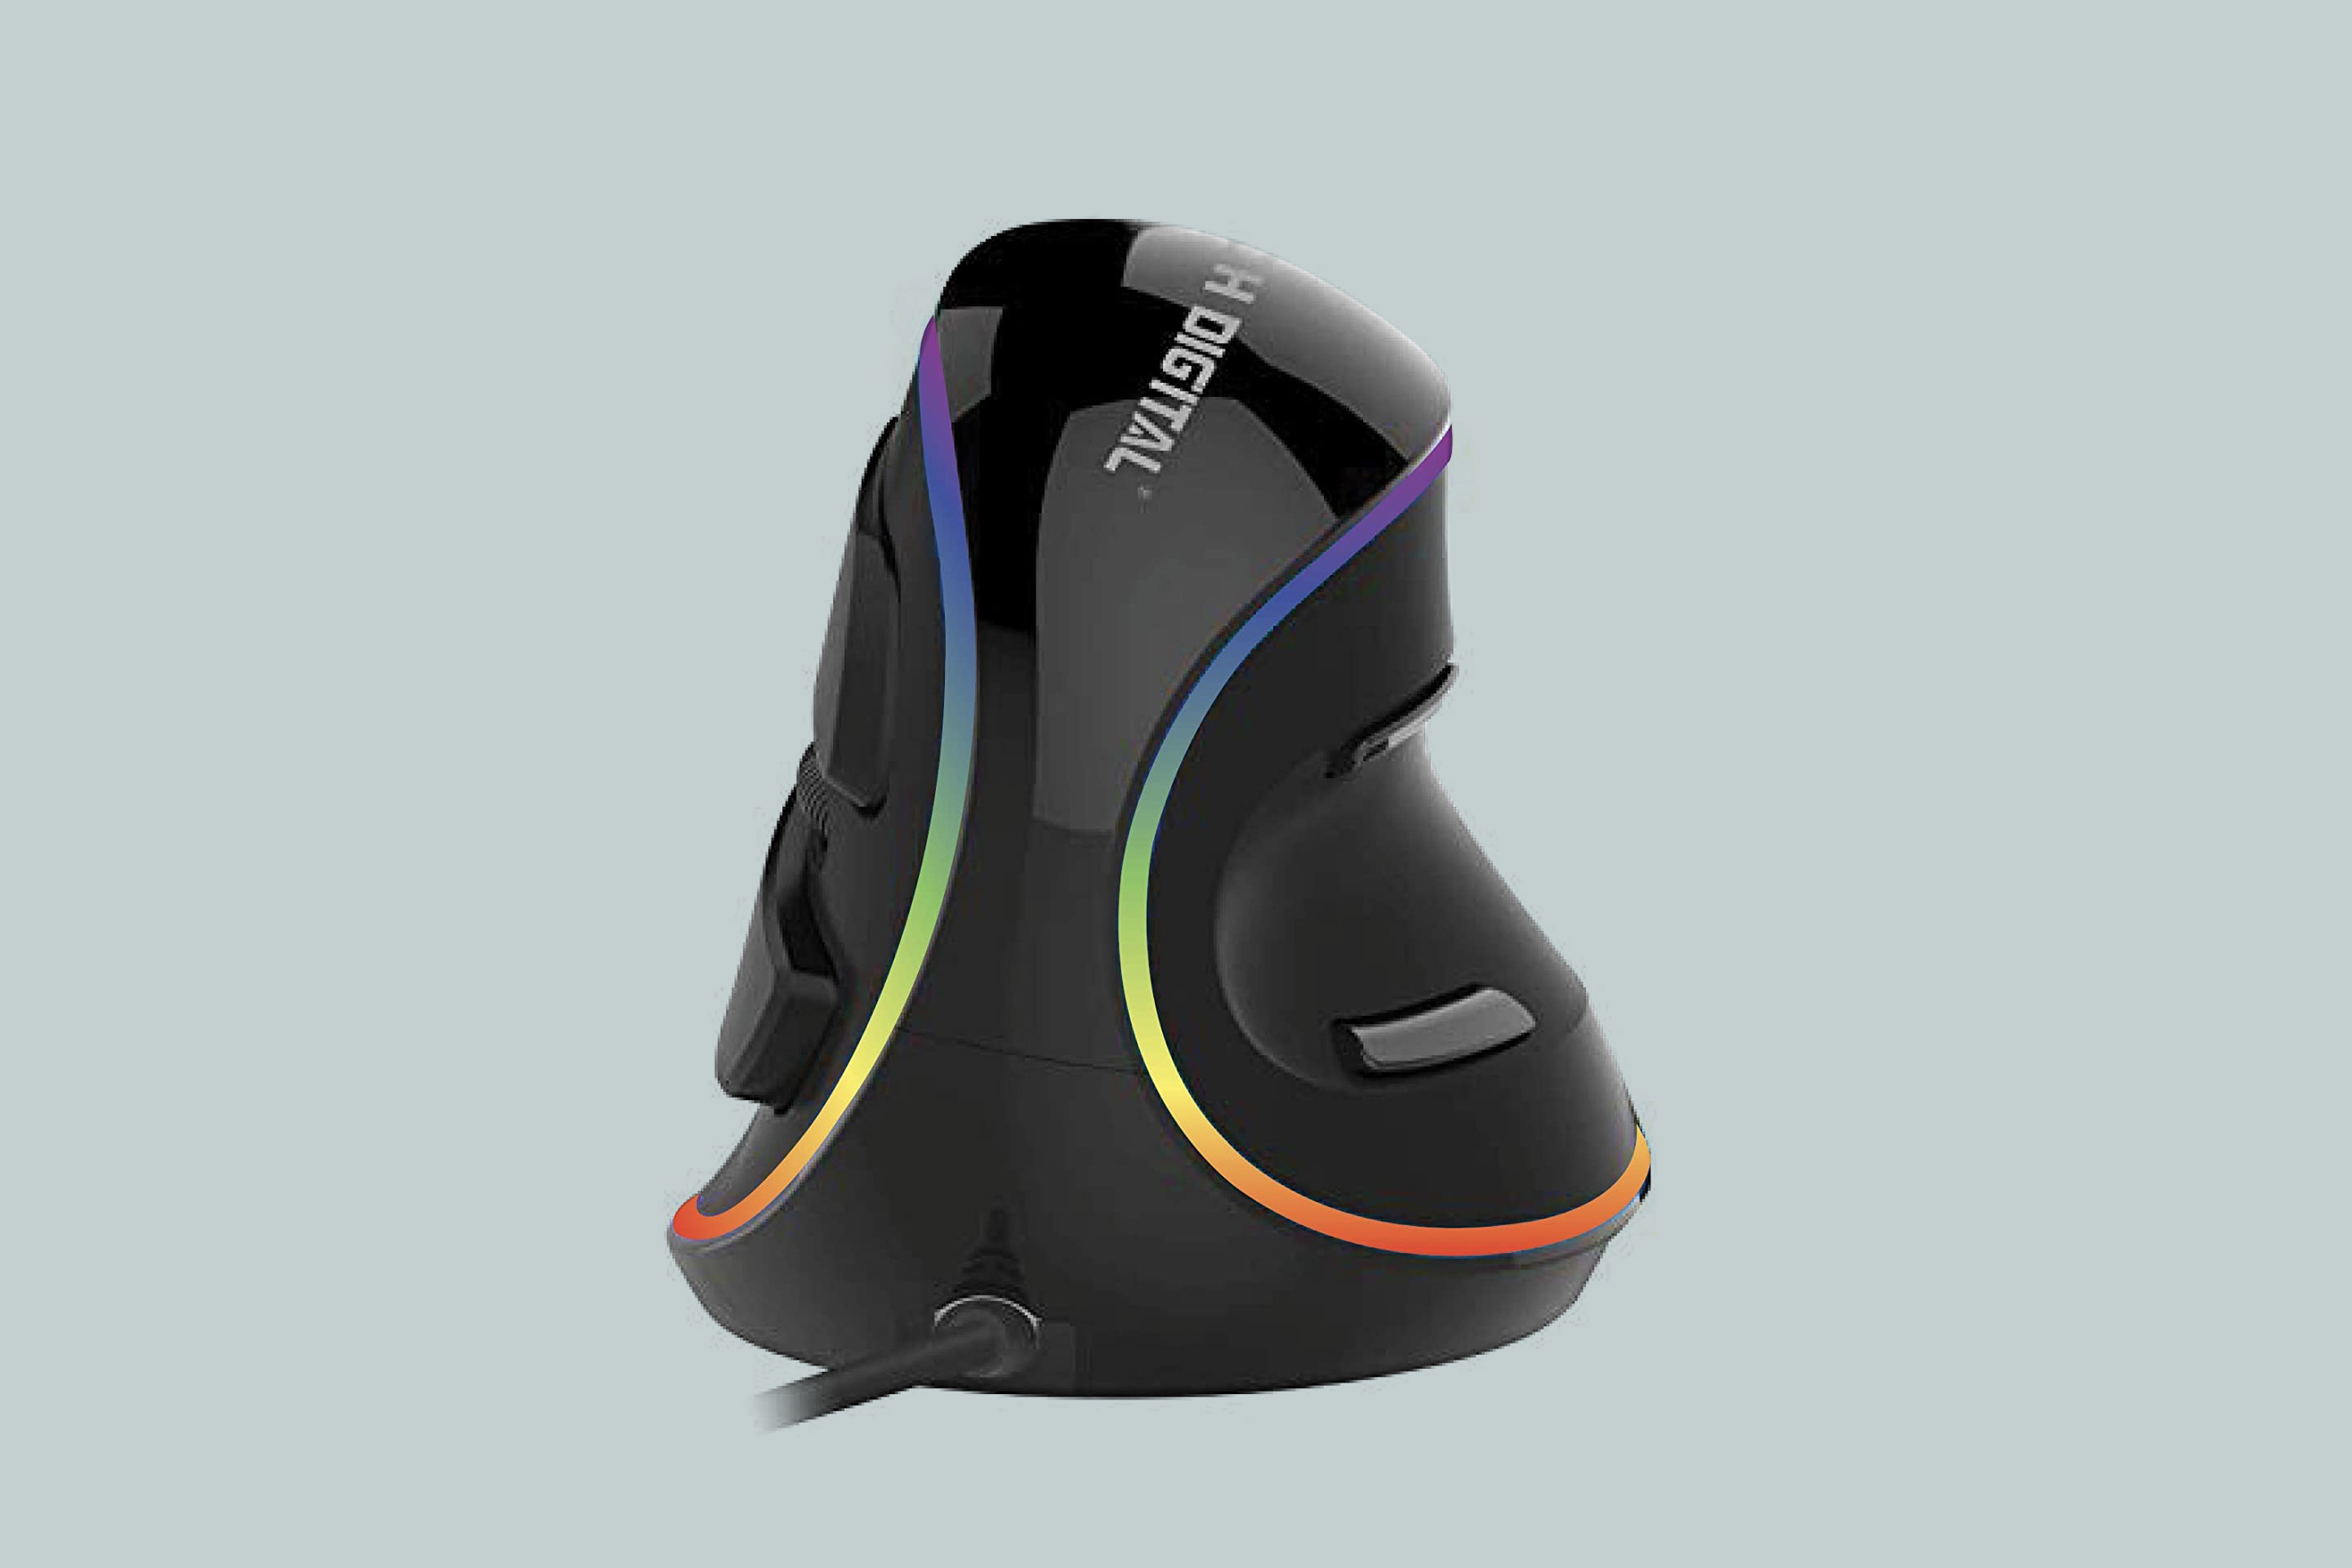 J-Tech Digital Vertical Ergonomic Mouse Wired with Chroma RGB Color LED